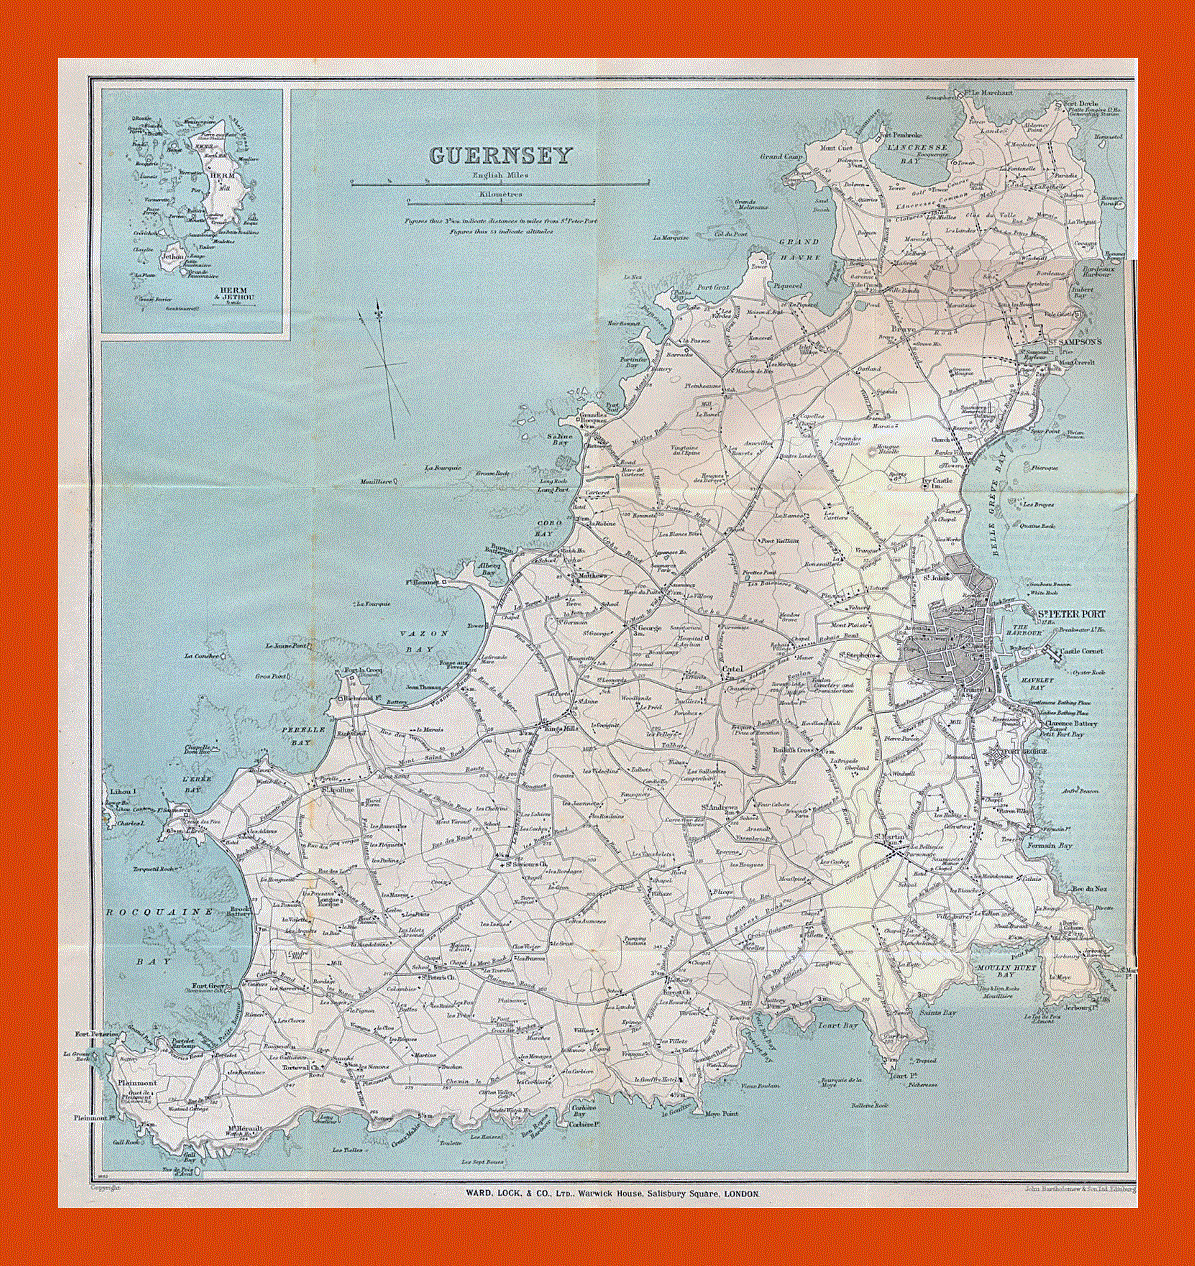 Old map of Guernsey - 1930